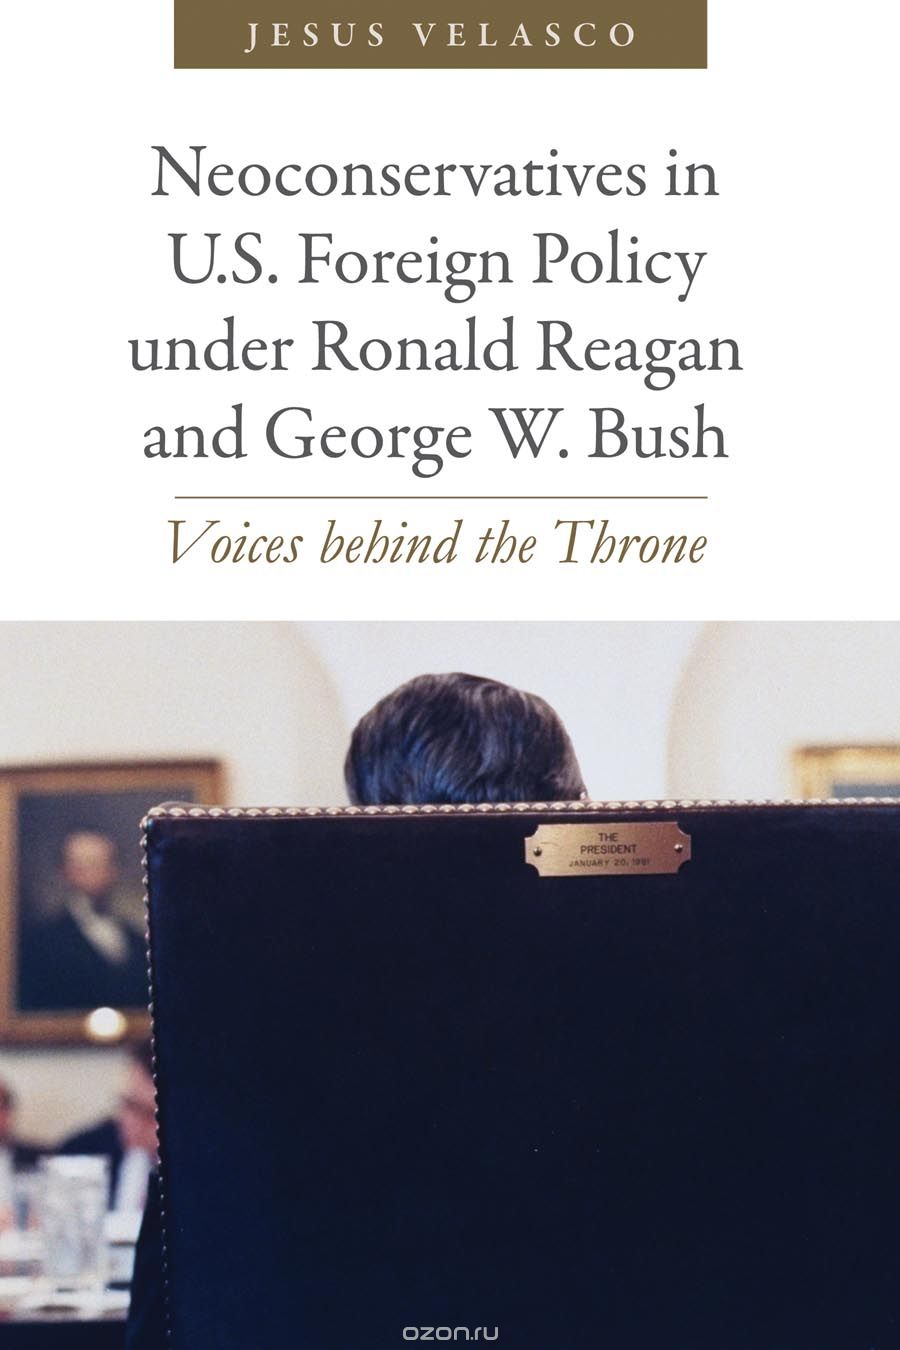 Скачать книгу "Neoconservatives in U.S. Foreign Policy under Ronald Reagan and George W. Bush –  Voices Behind the Throne"